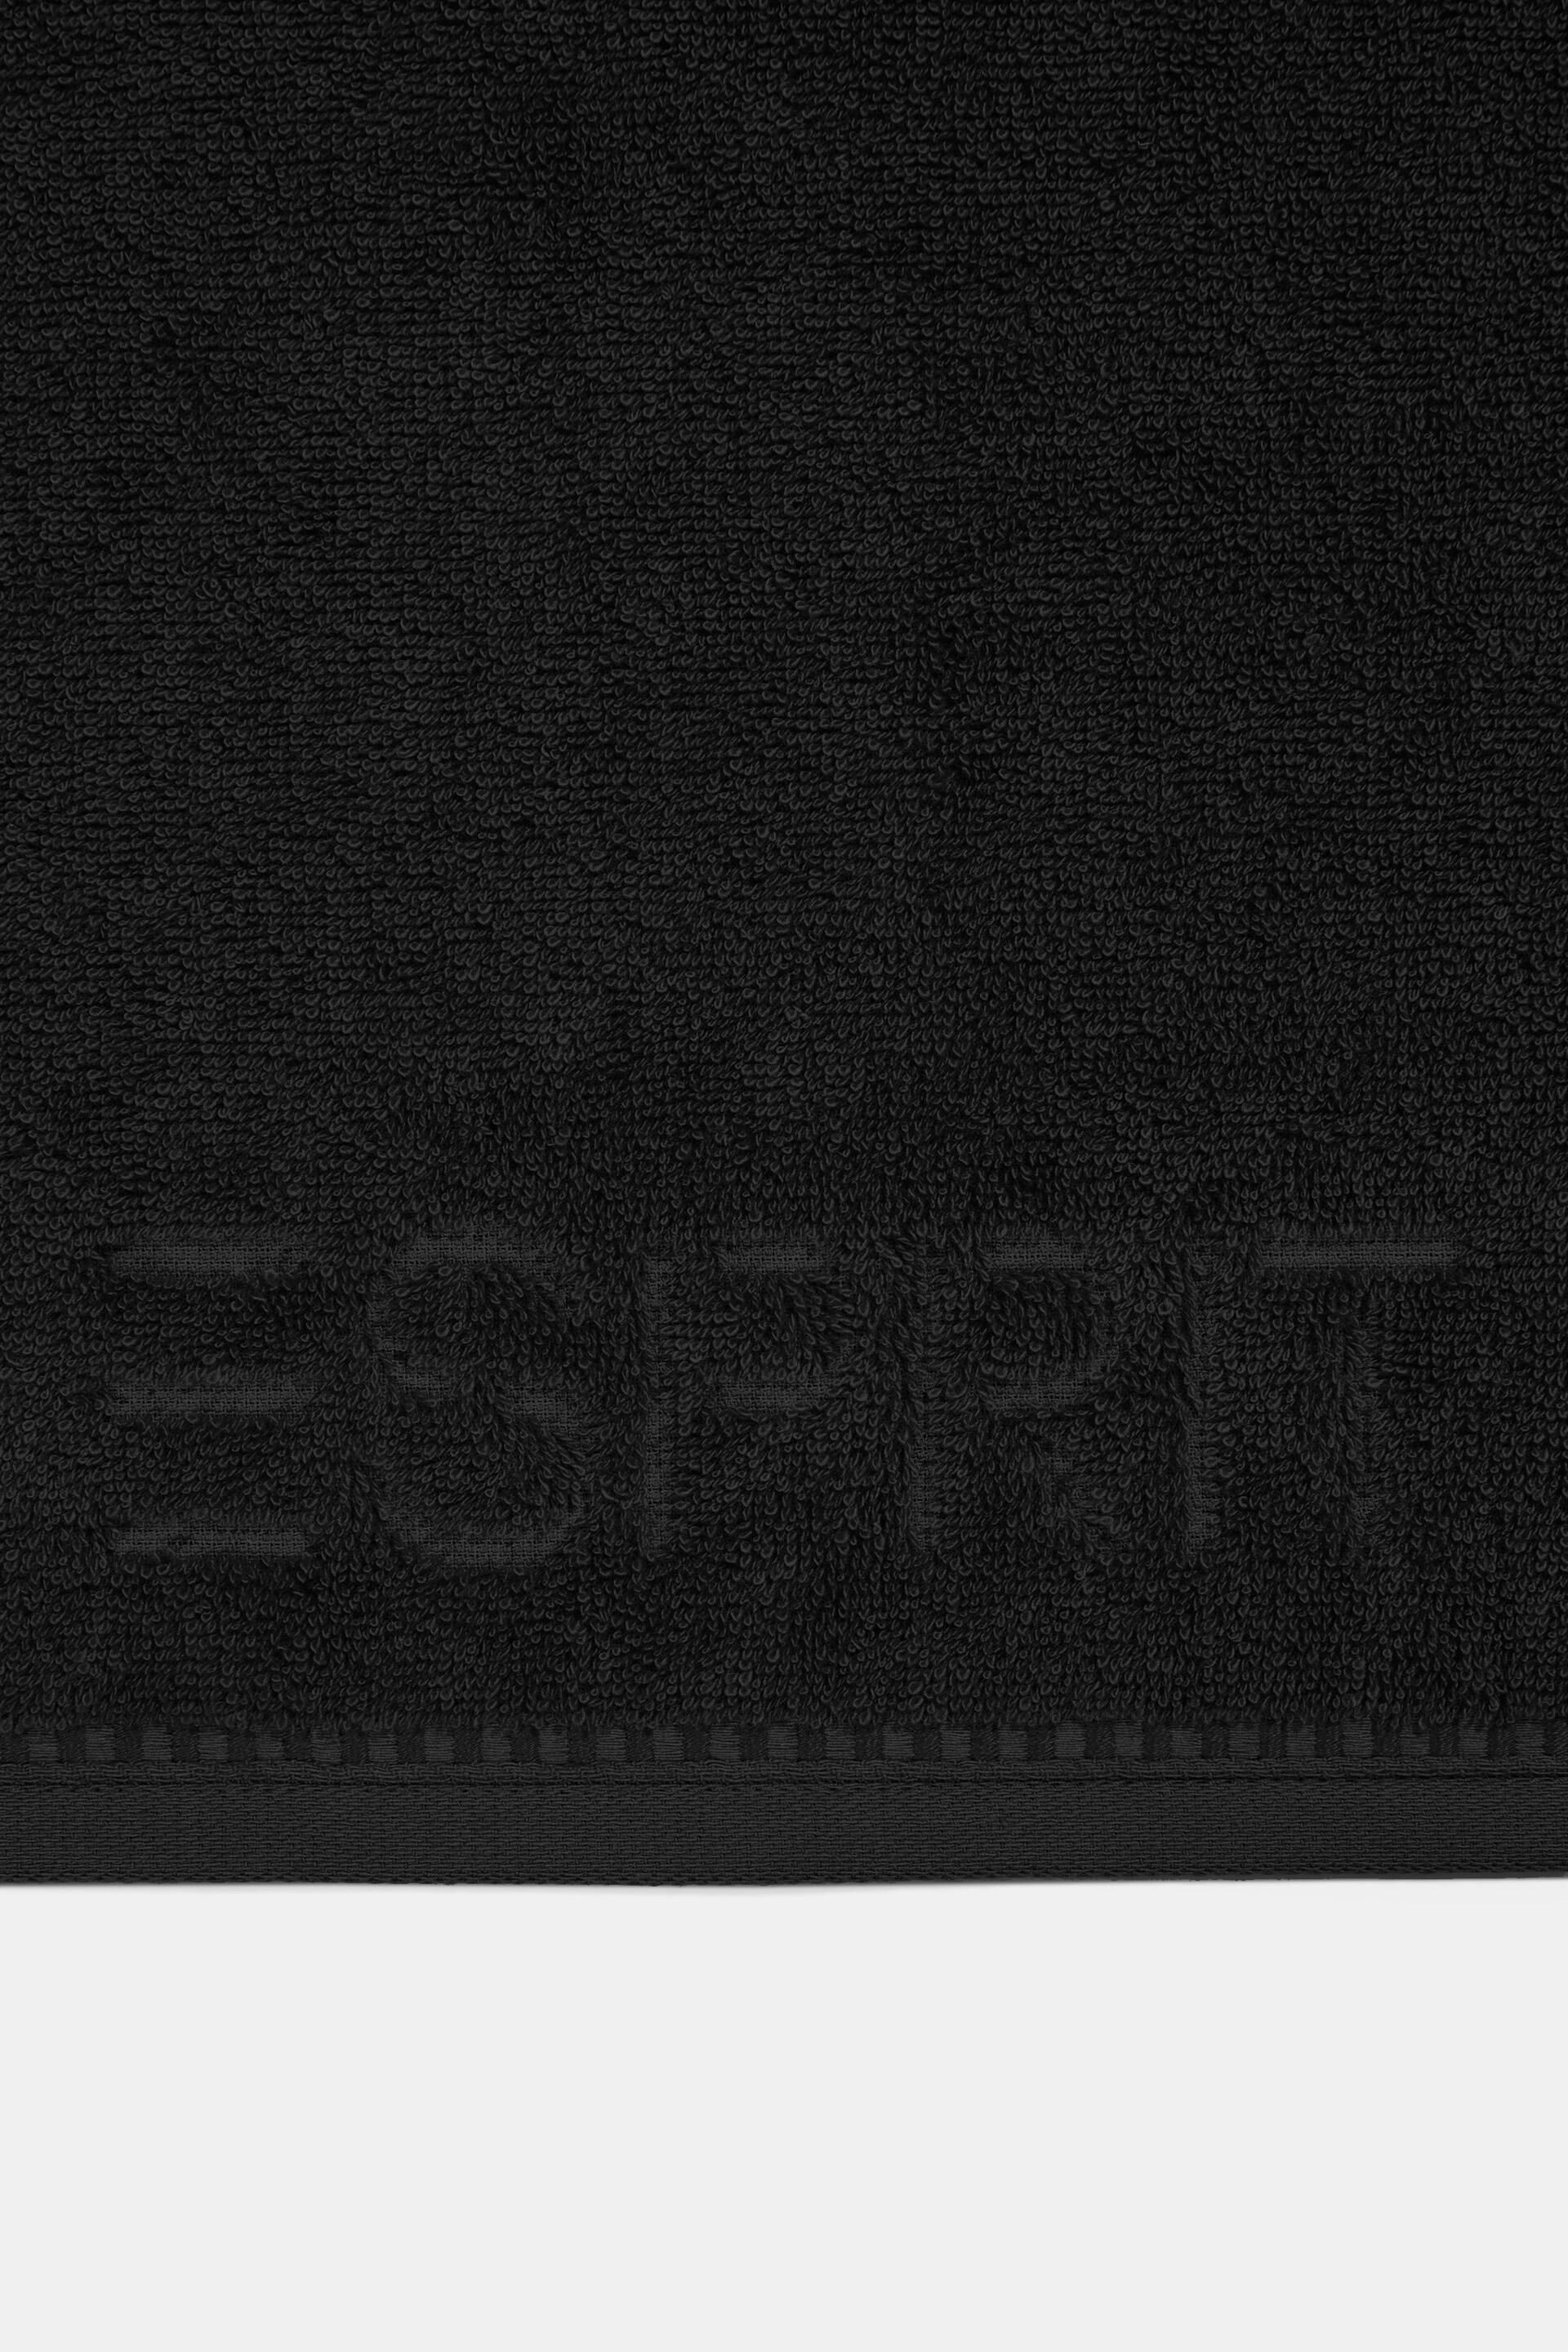 Esprit collection cloth towel Terry